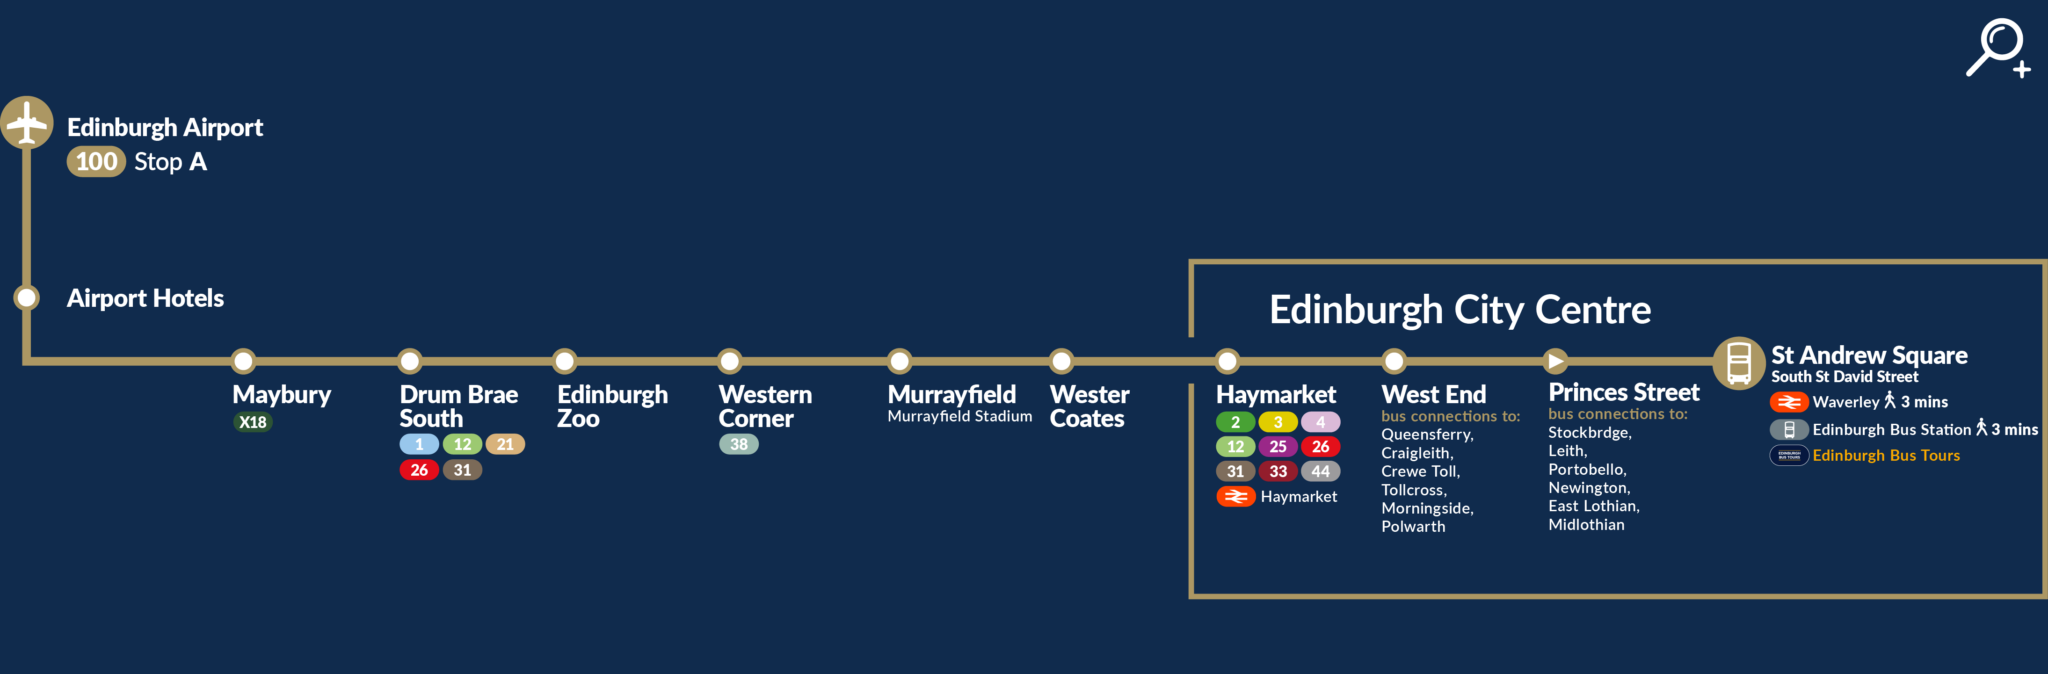 Airlink Route Map with Connections